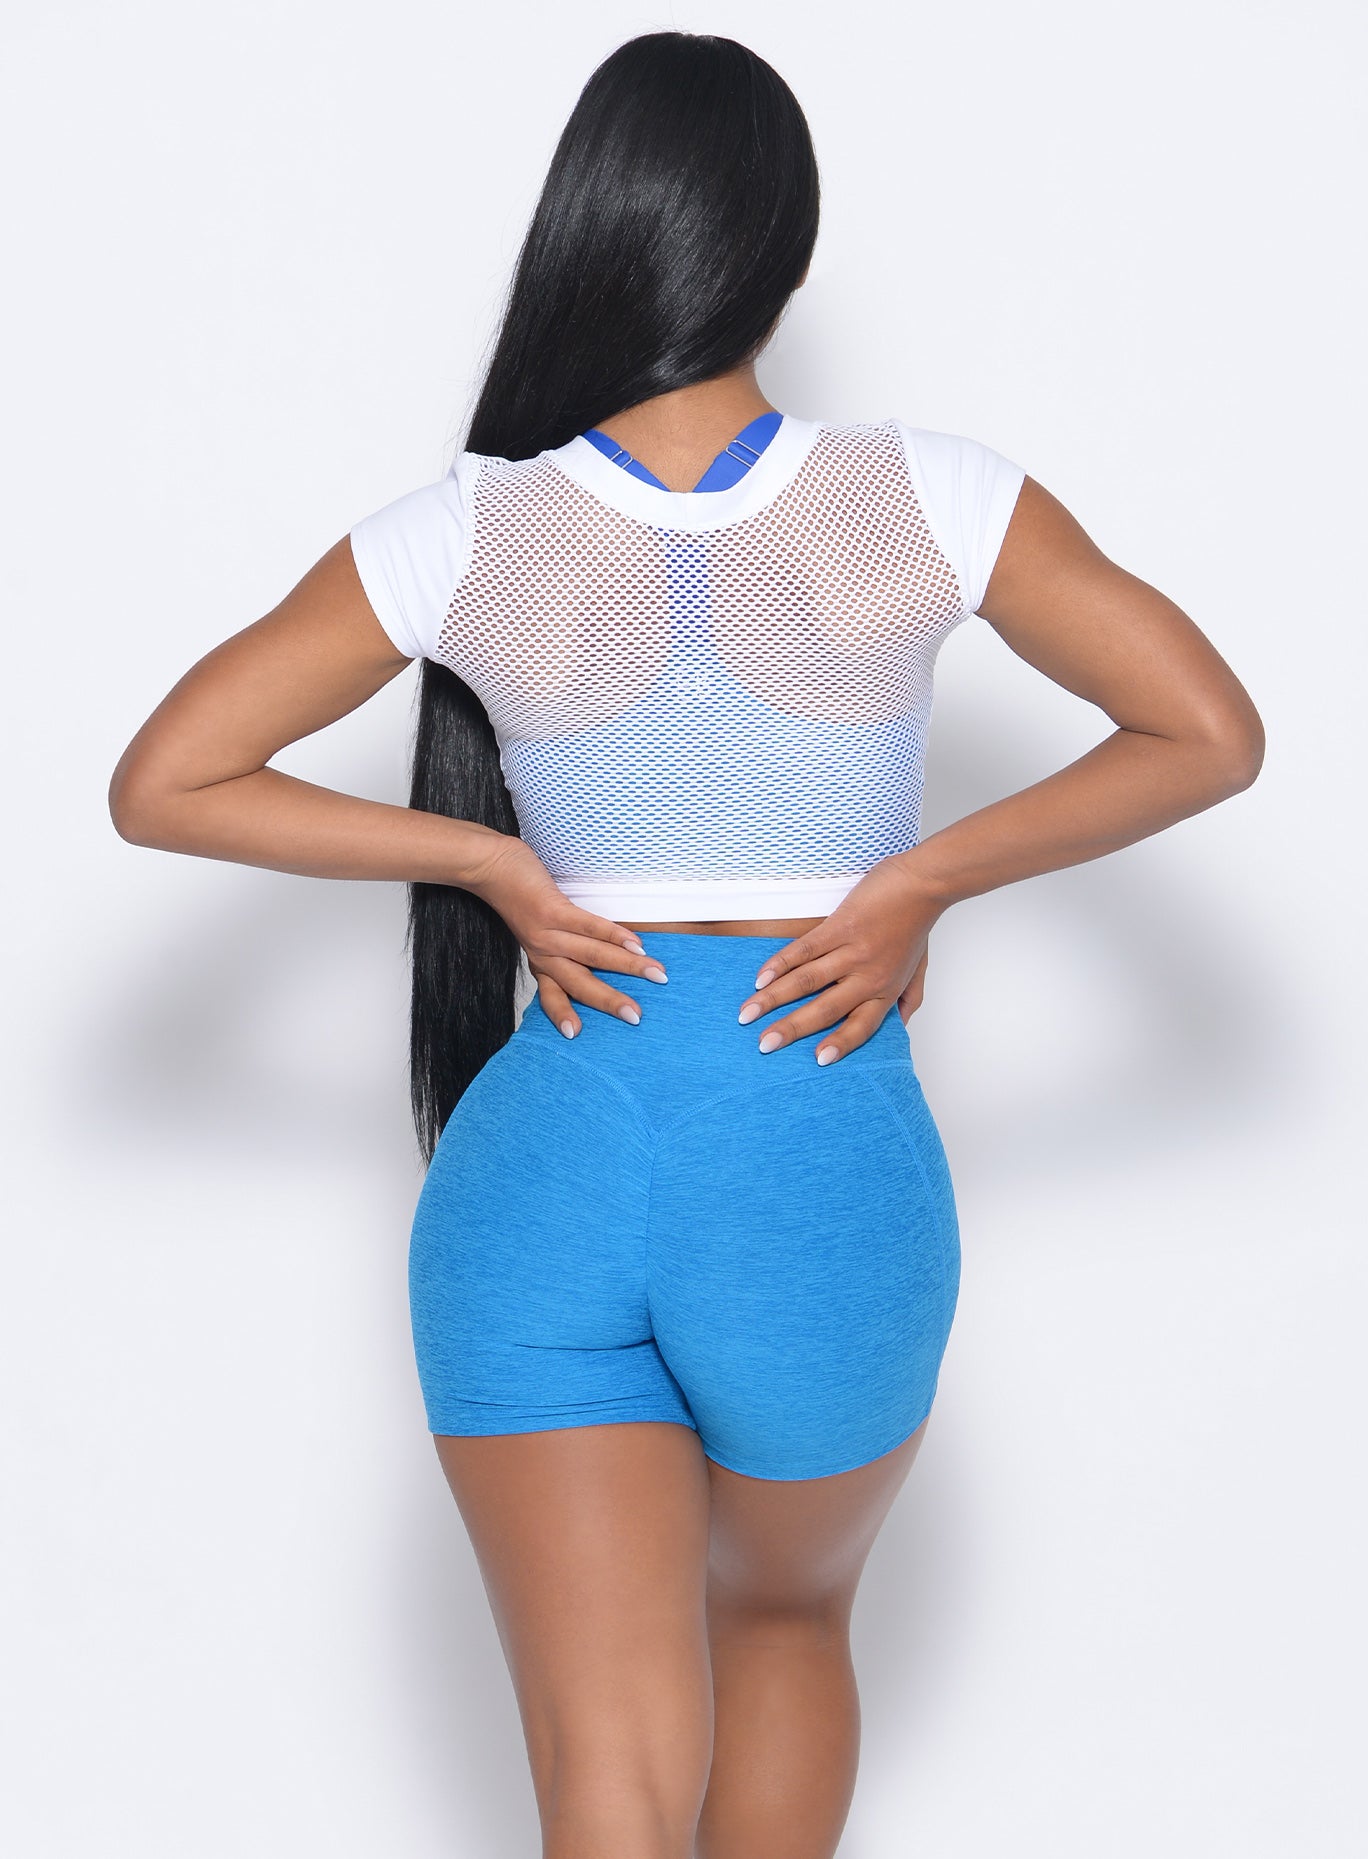 Back view of the model wearing our tiny waist shorts in sky blue and a white tank